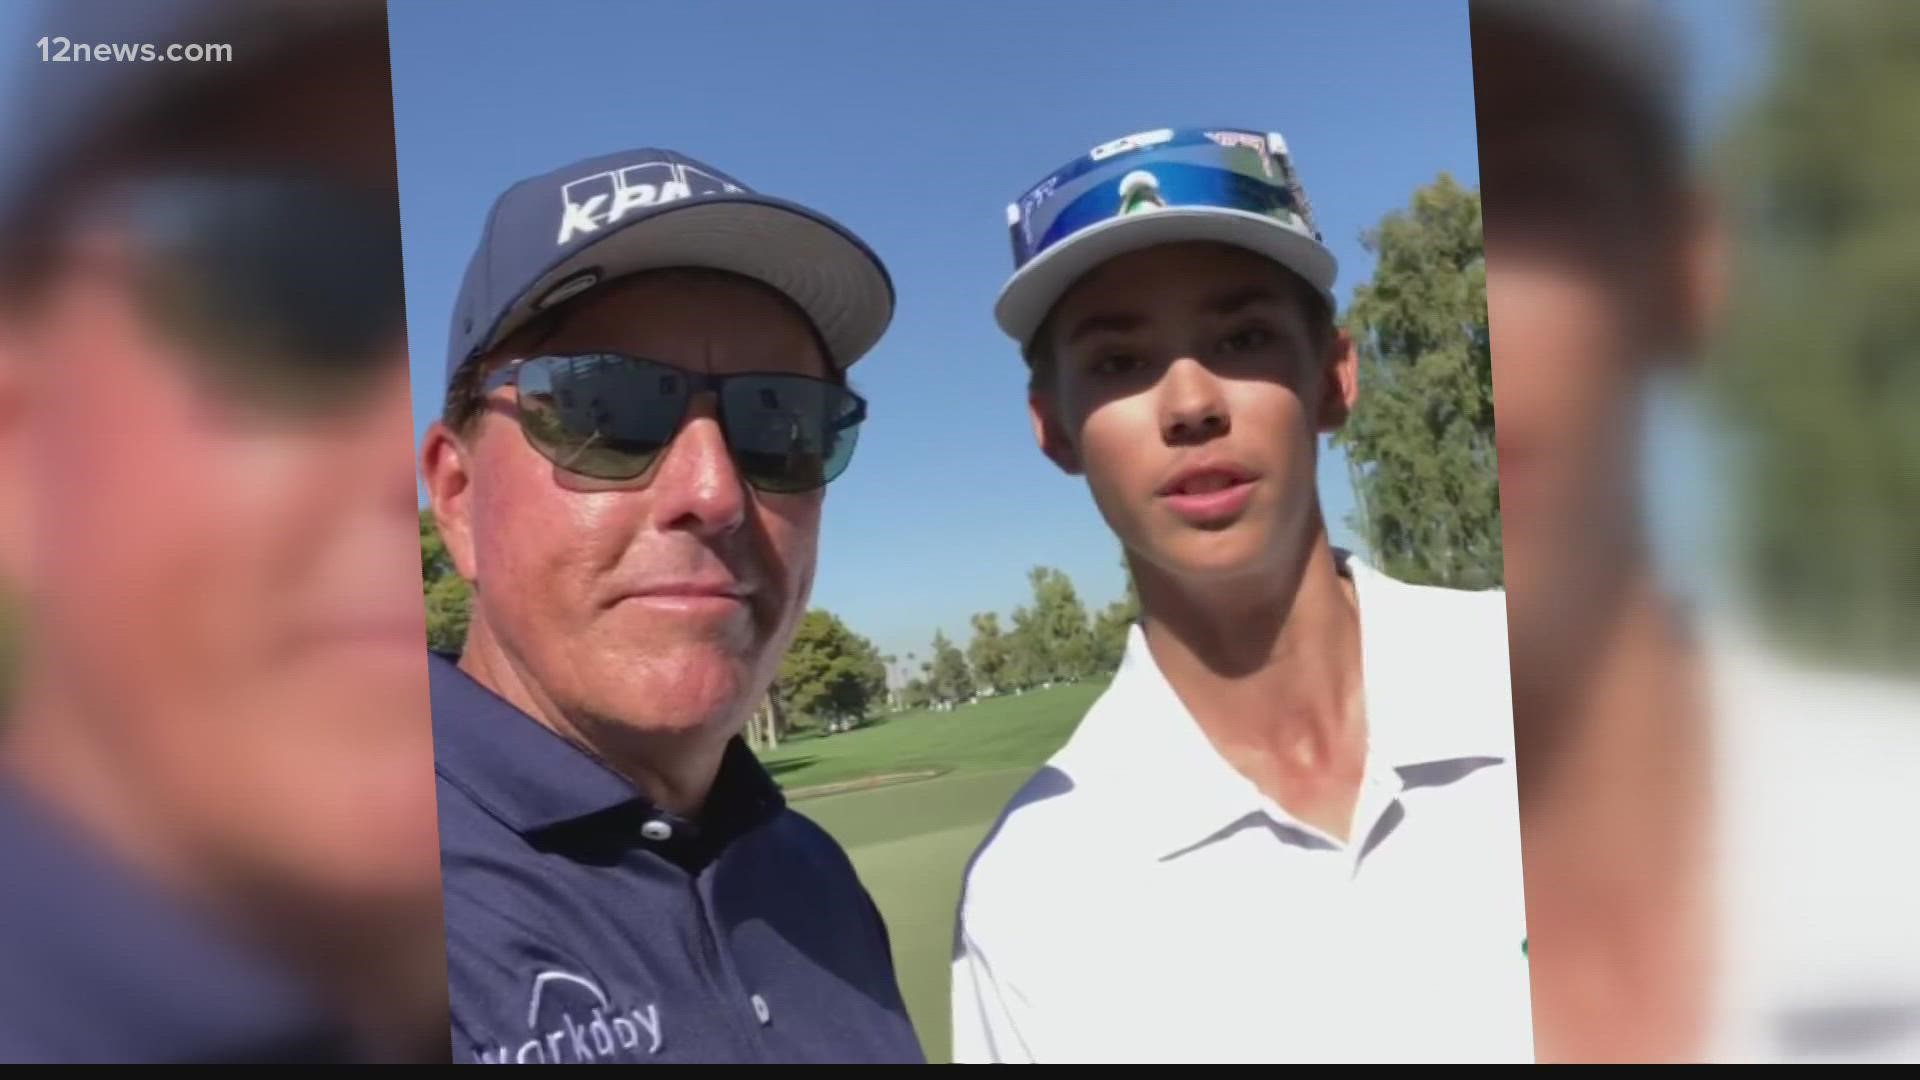 Phil Mickelson goes above and beyond for Valley high school golfers 12news image